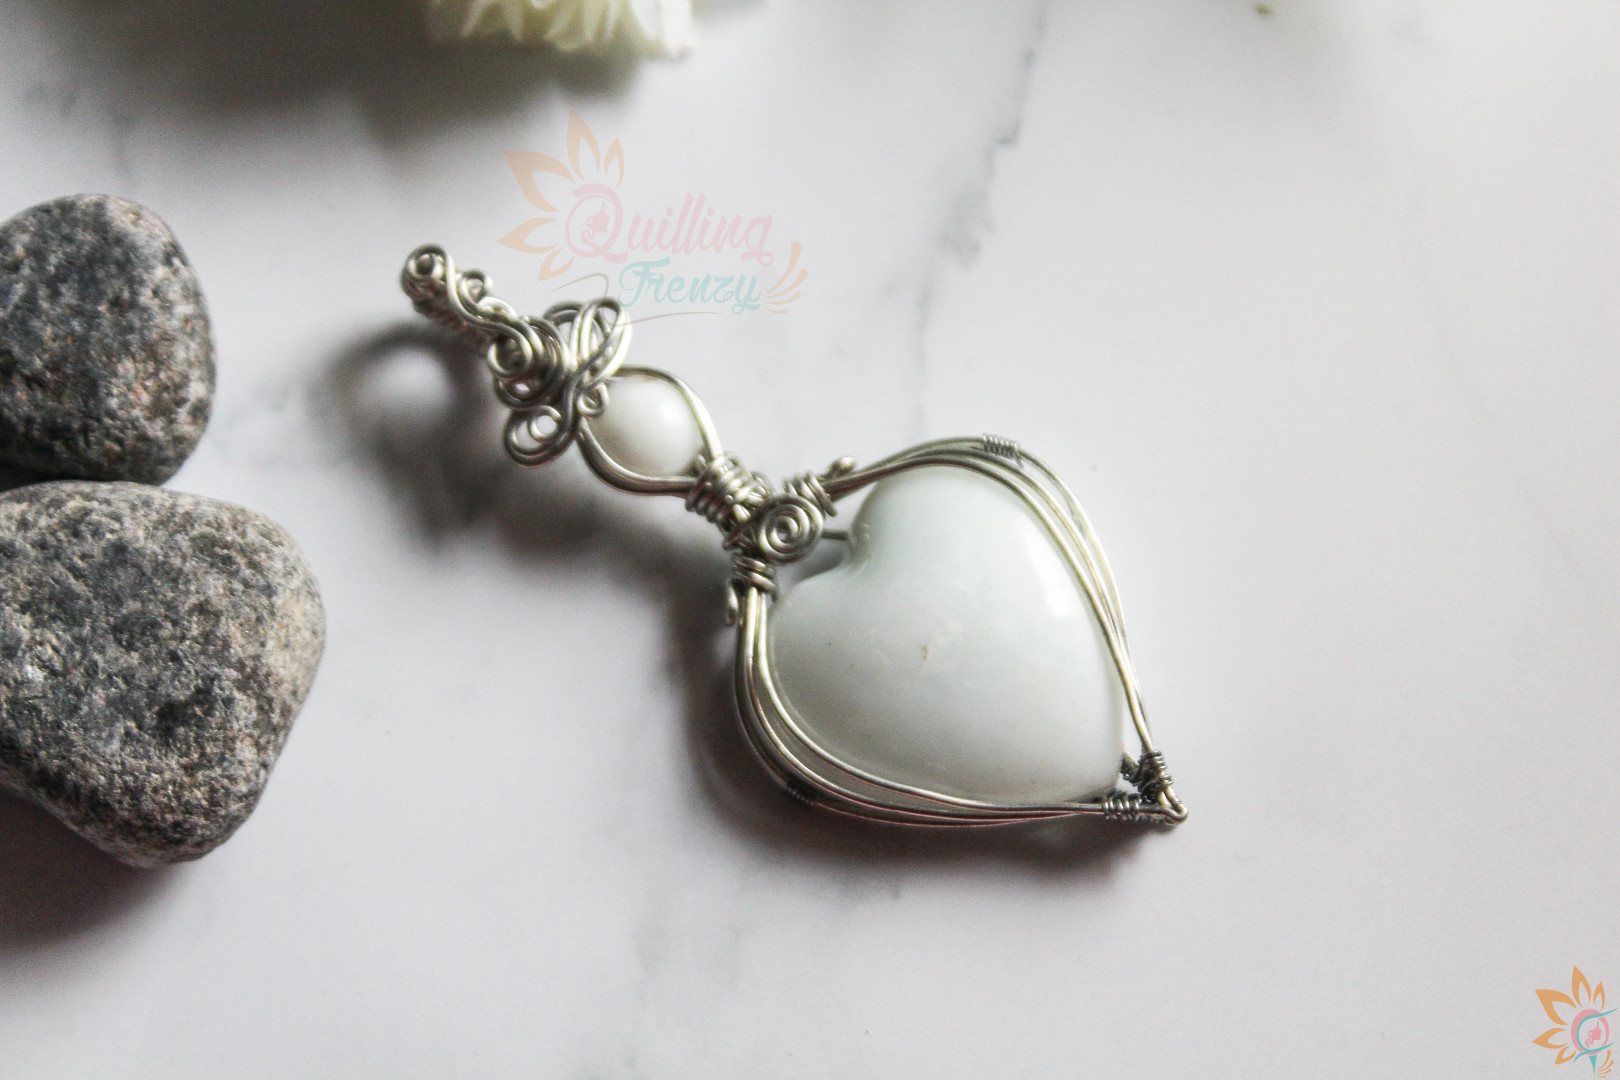 White heart resin stone wire wrapped pendant